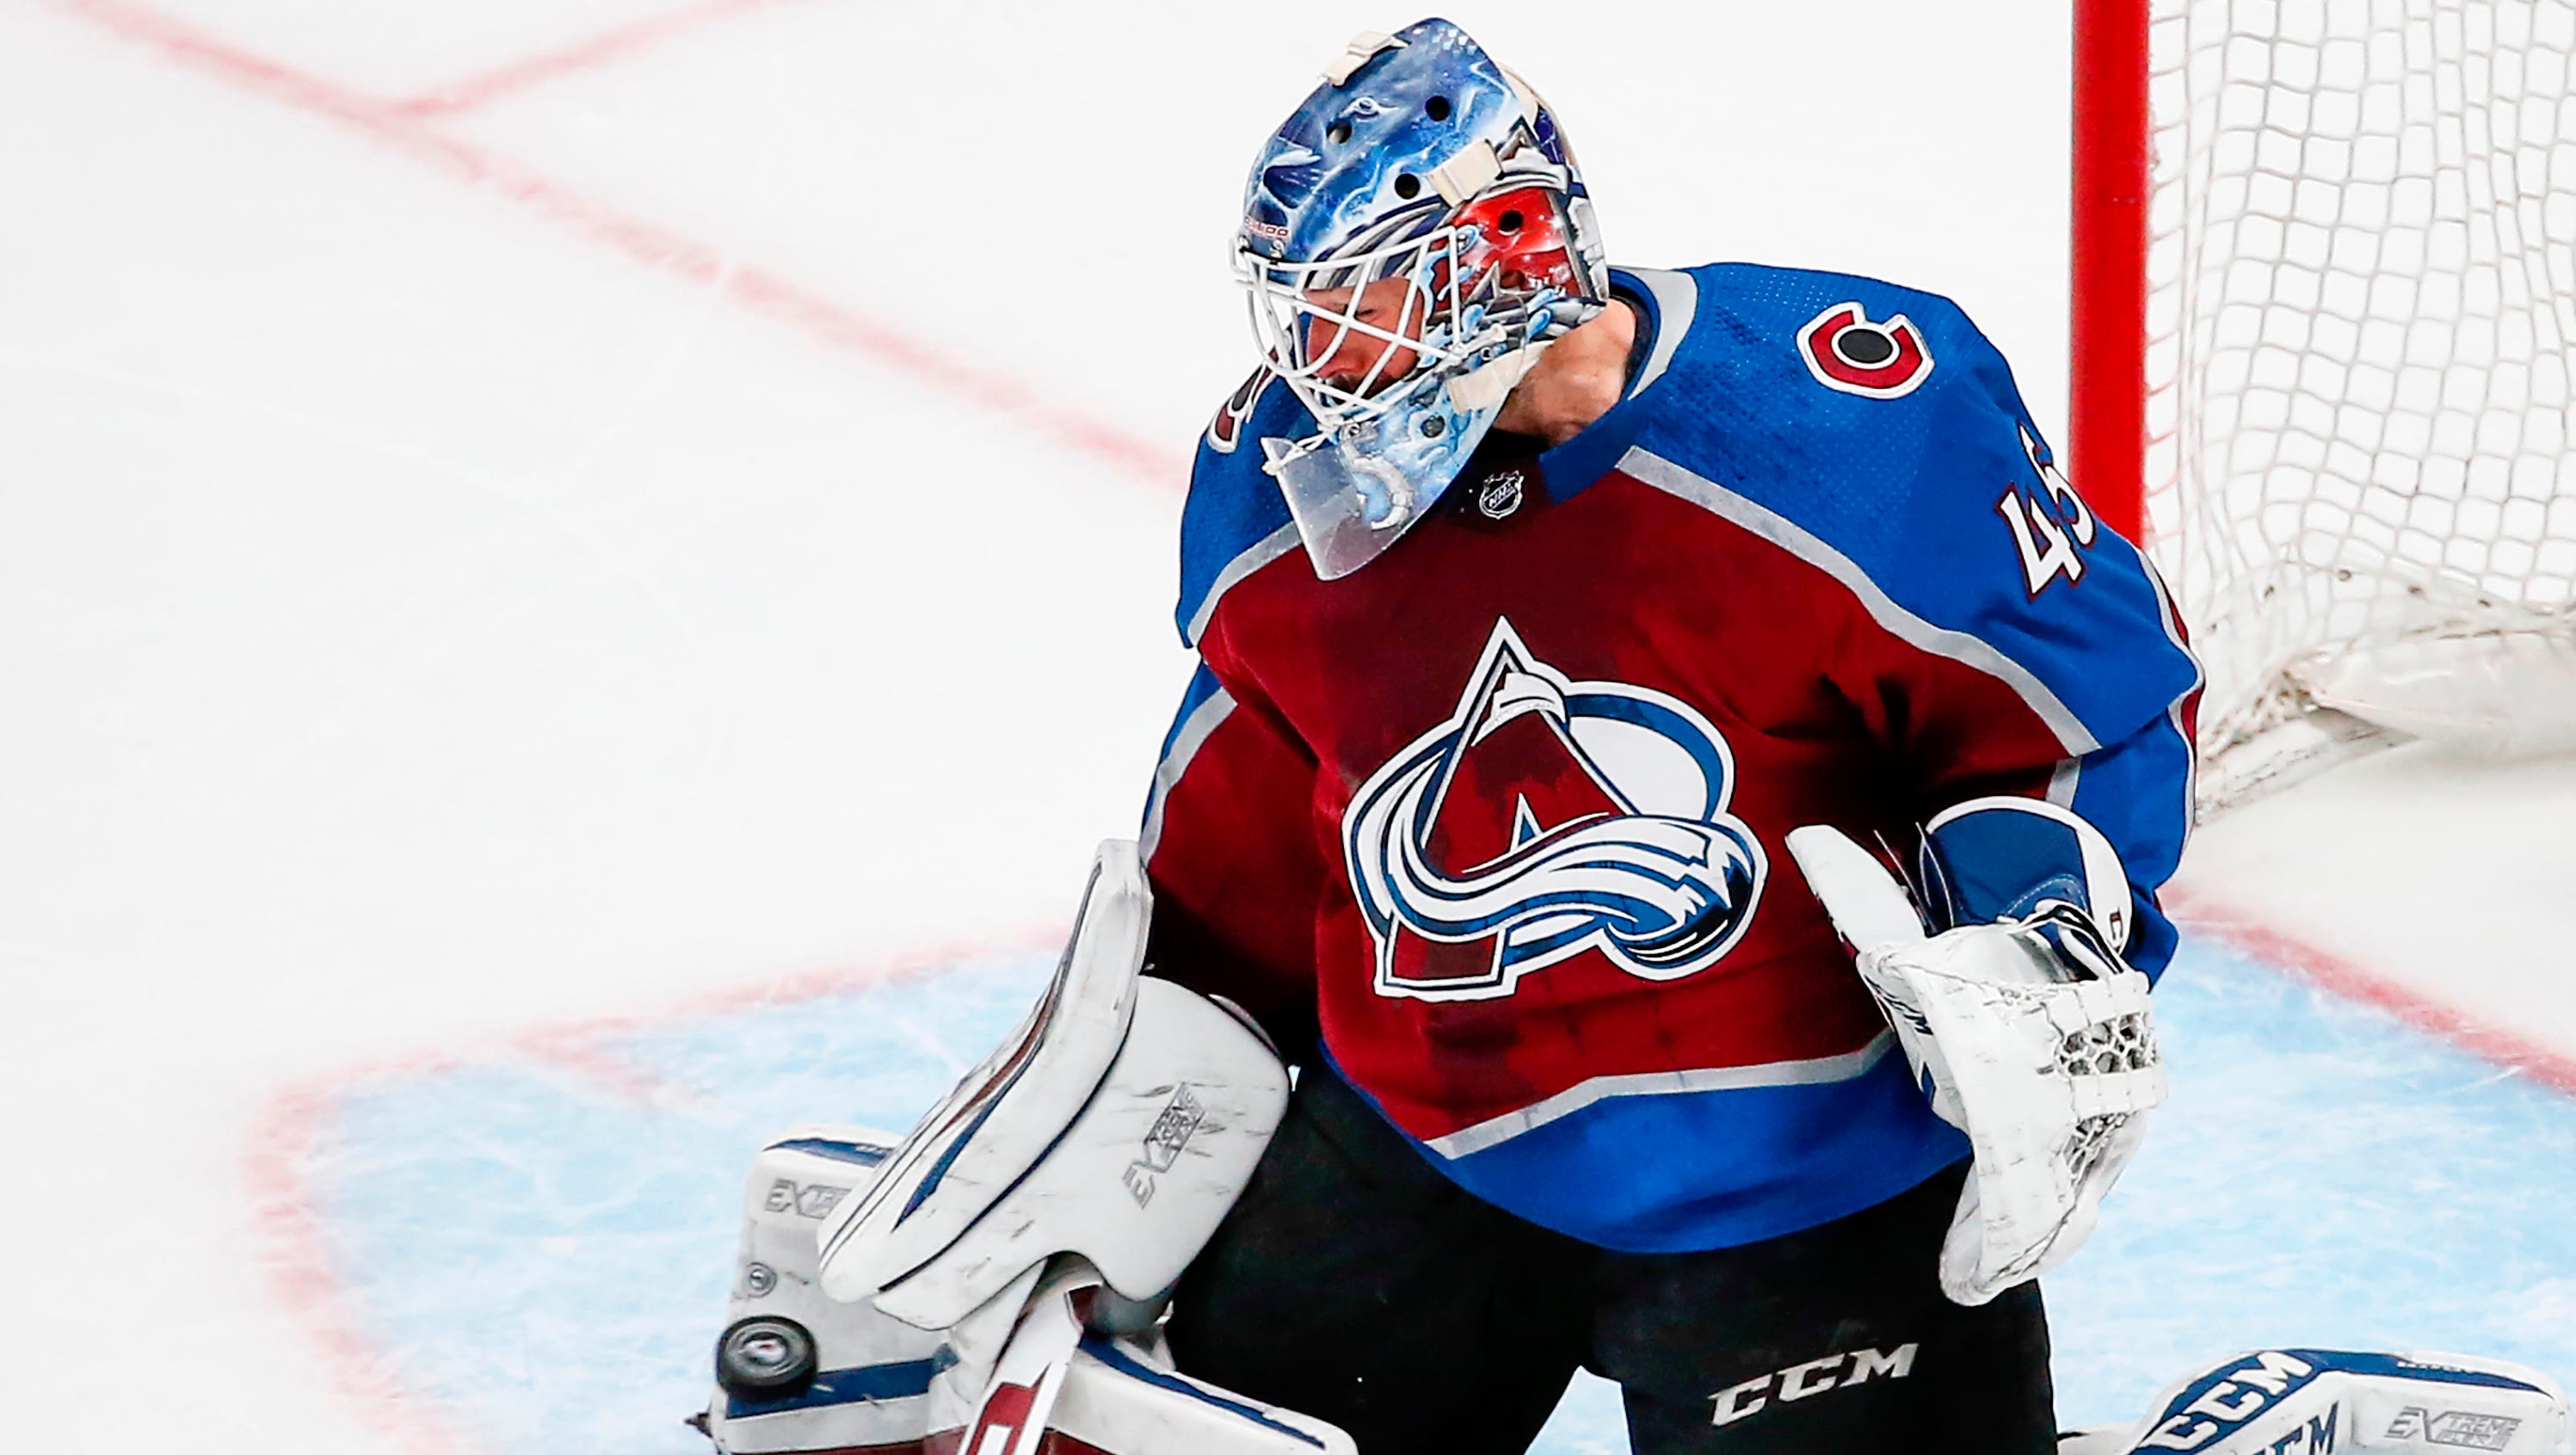 Colorado Avalanche goaltender Jonathan Bernier blocks a shot from the St. Louis Blues during the first period of a game Saturday, April 7, 2018, in Denver.